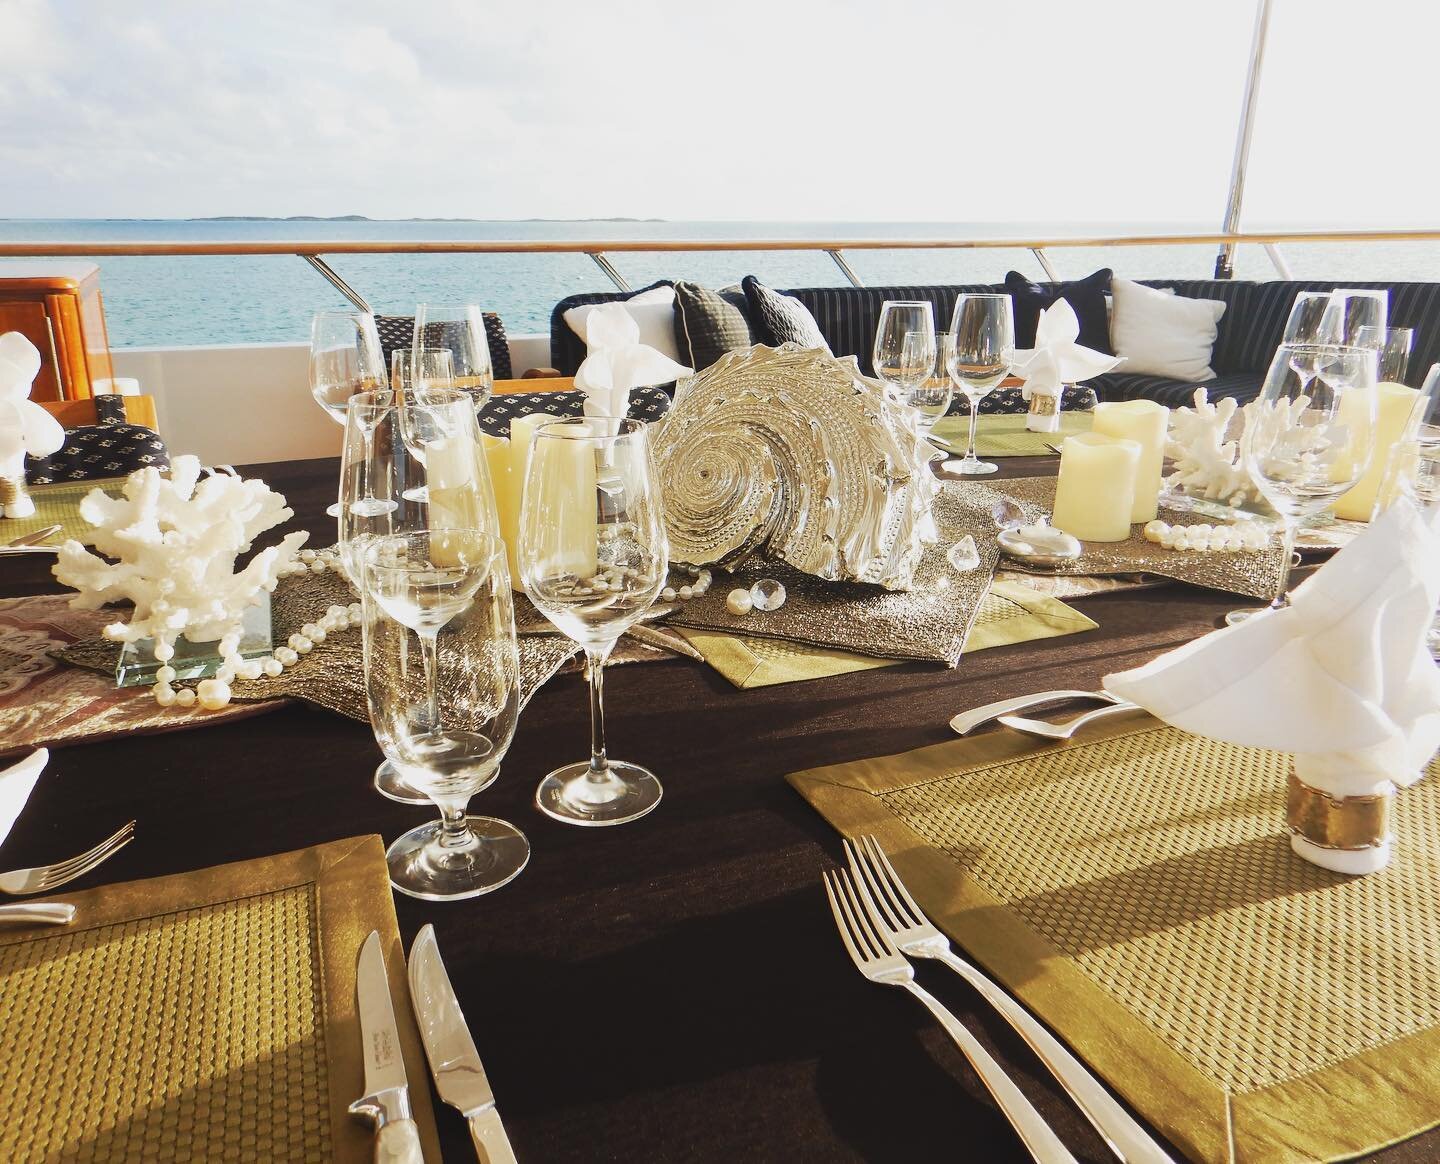 Ready for a romantic evening and a great view?! Come stay with us on Lady J. #charterladyj #bahamas #greatviews #bluewater #easyliving